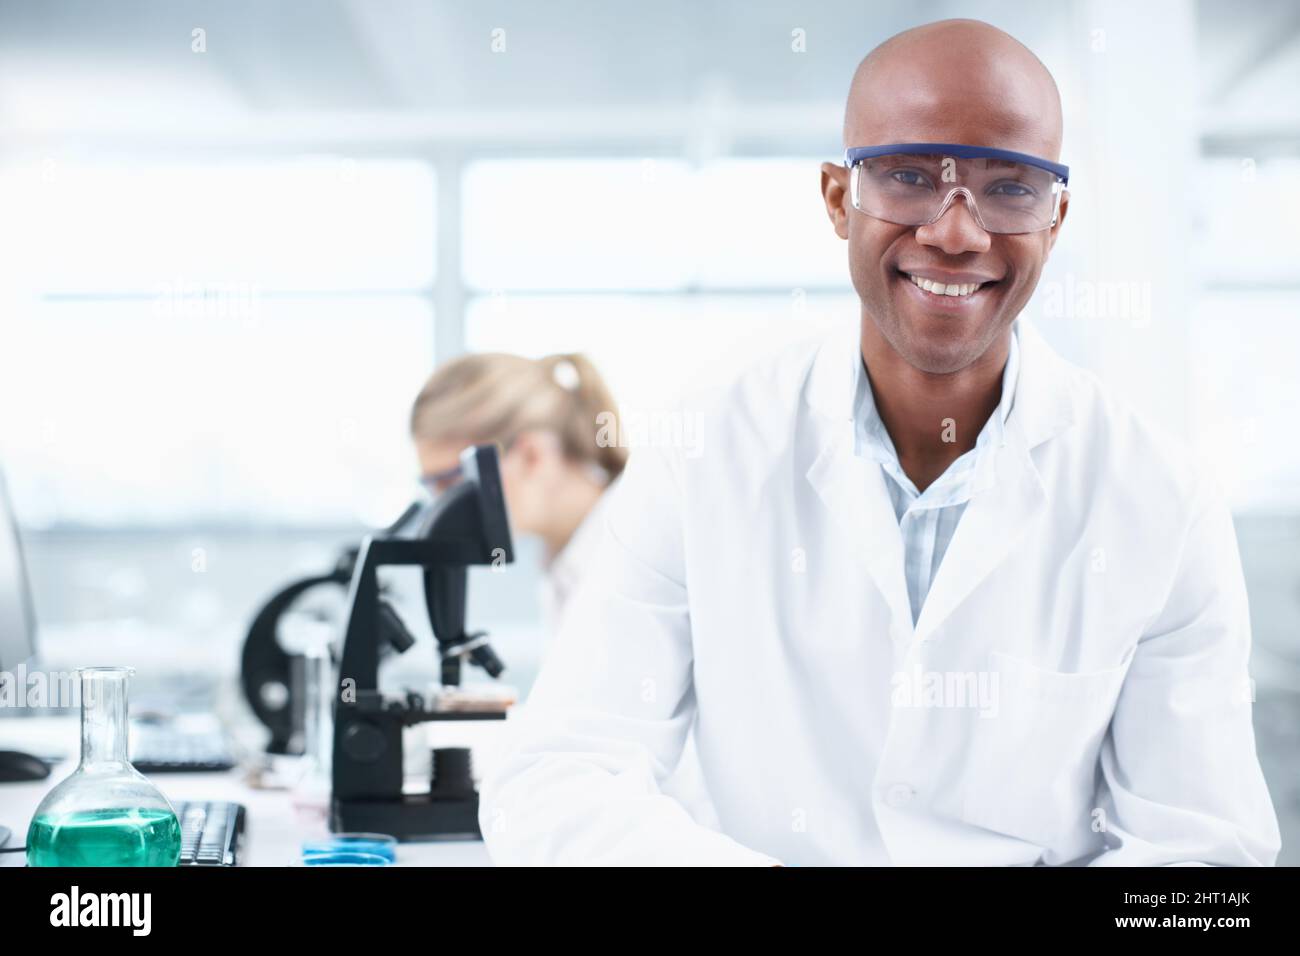 Smiling researcher. Portrait of a smiling young chemist in the lab with a female coworker in the background. Stock Photo